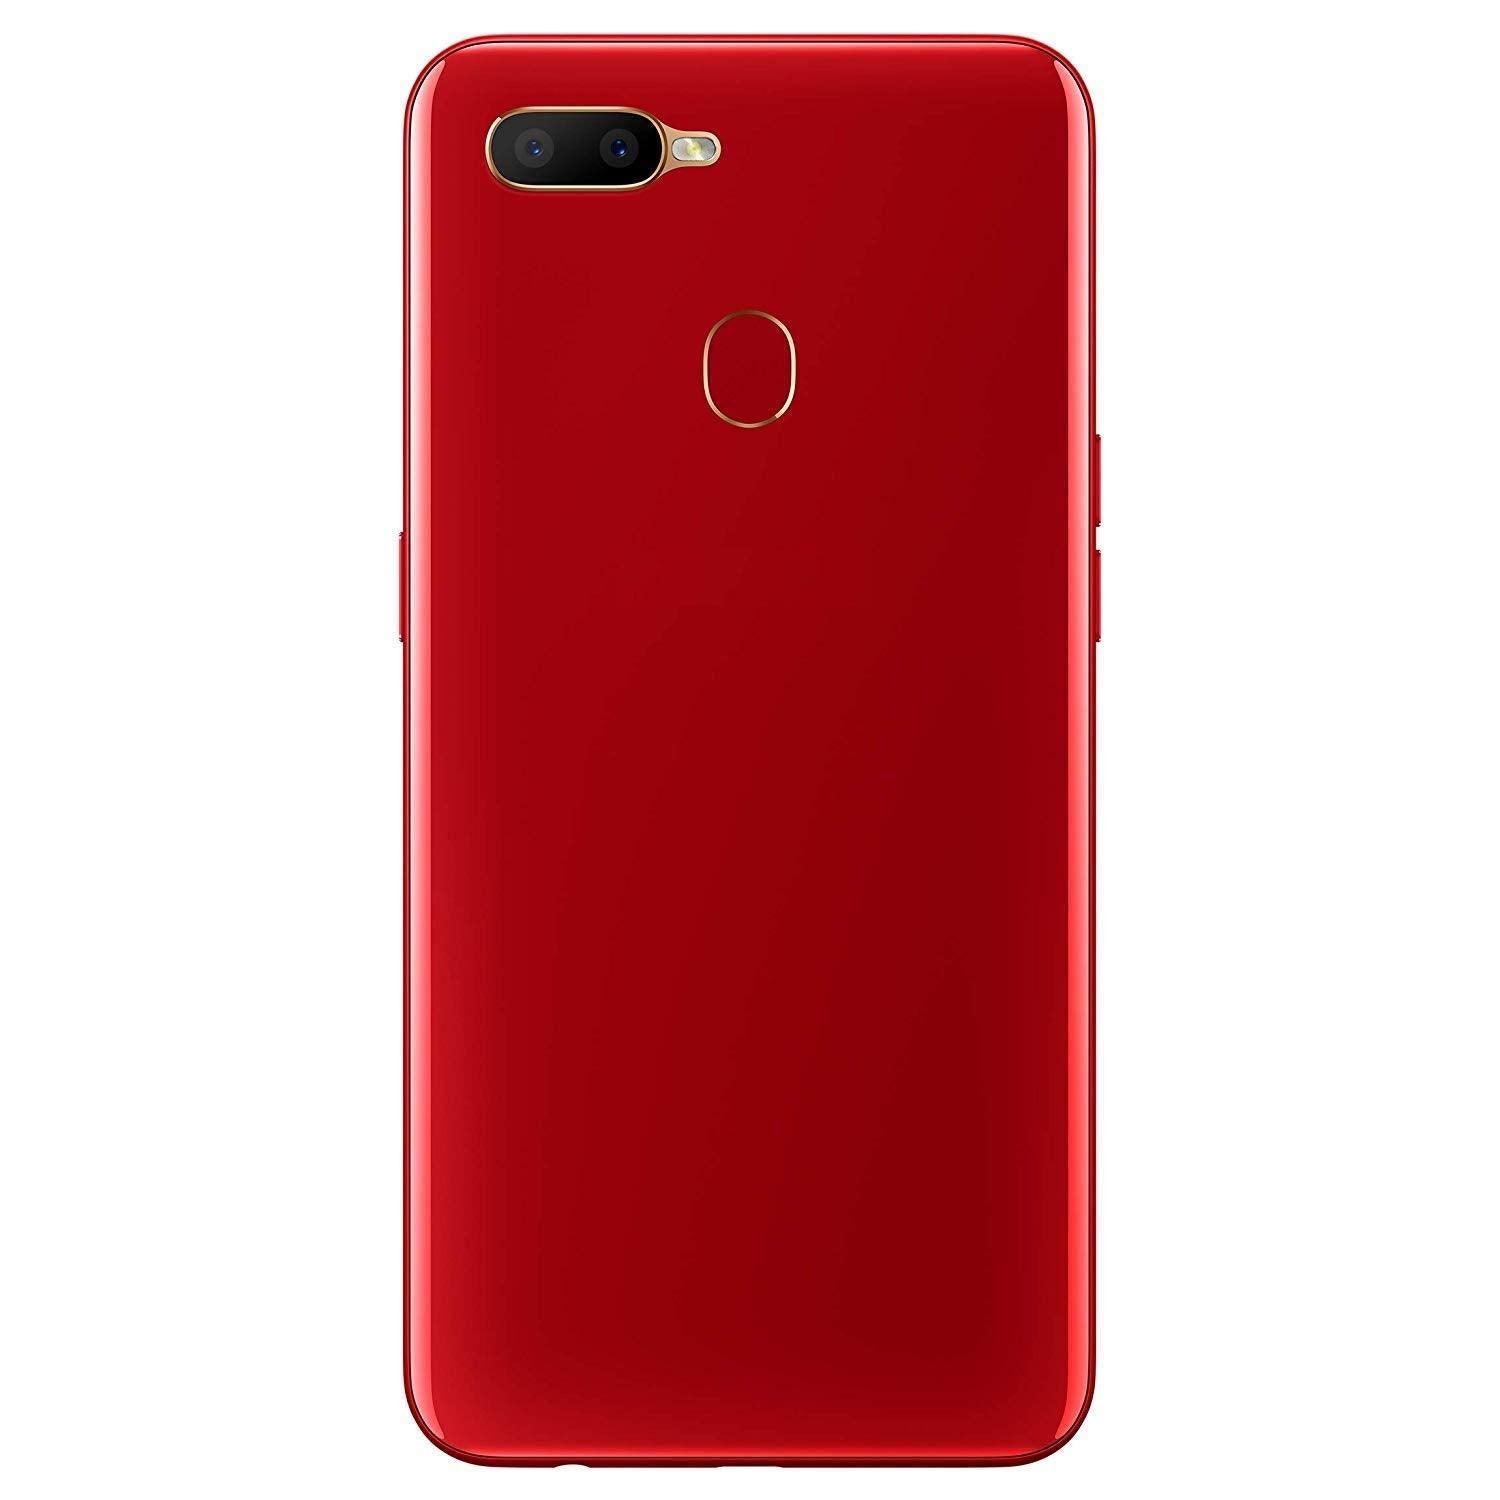 Back Glass Panel for Oppo A5s Red